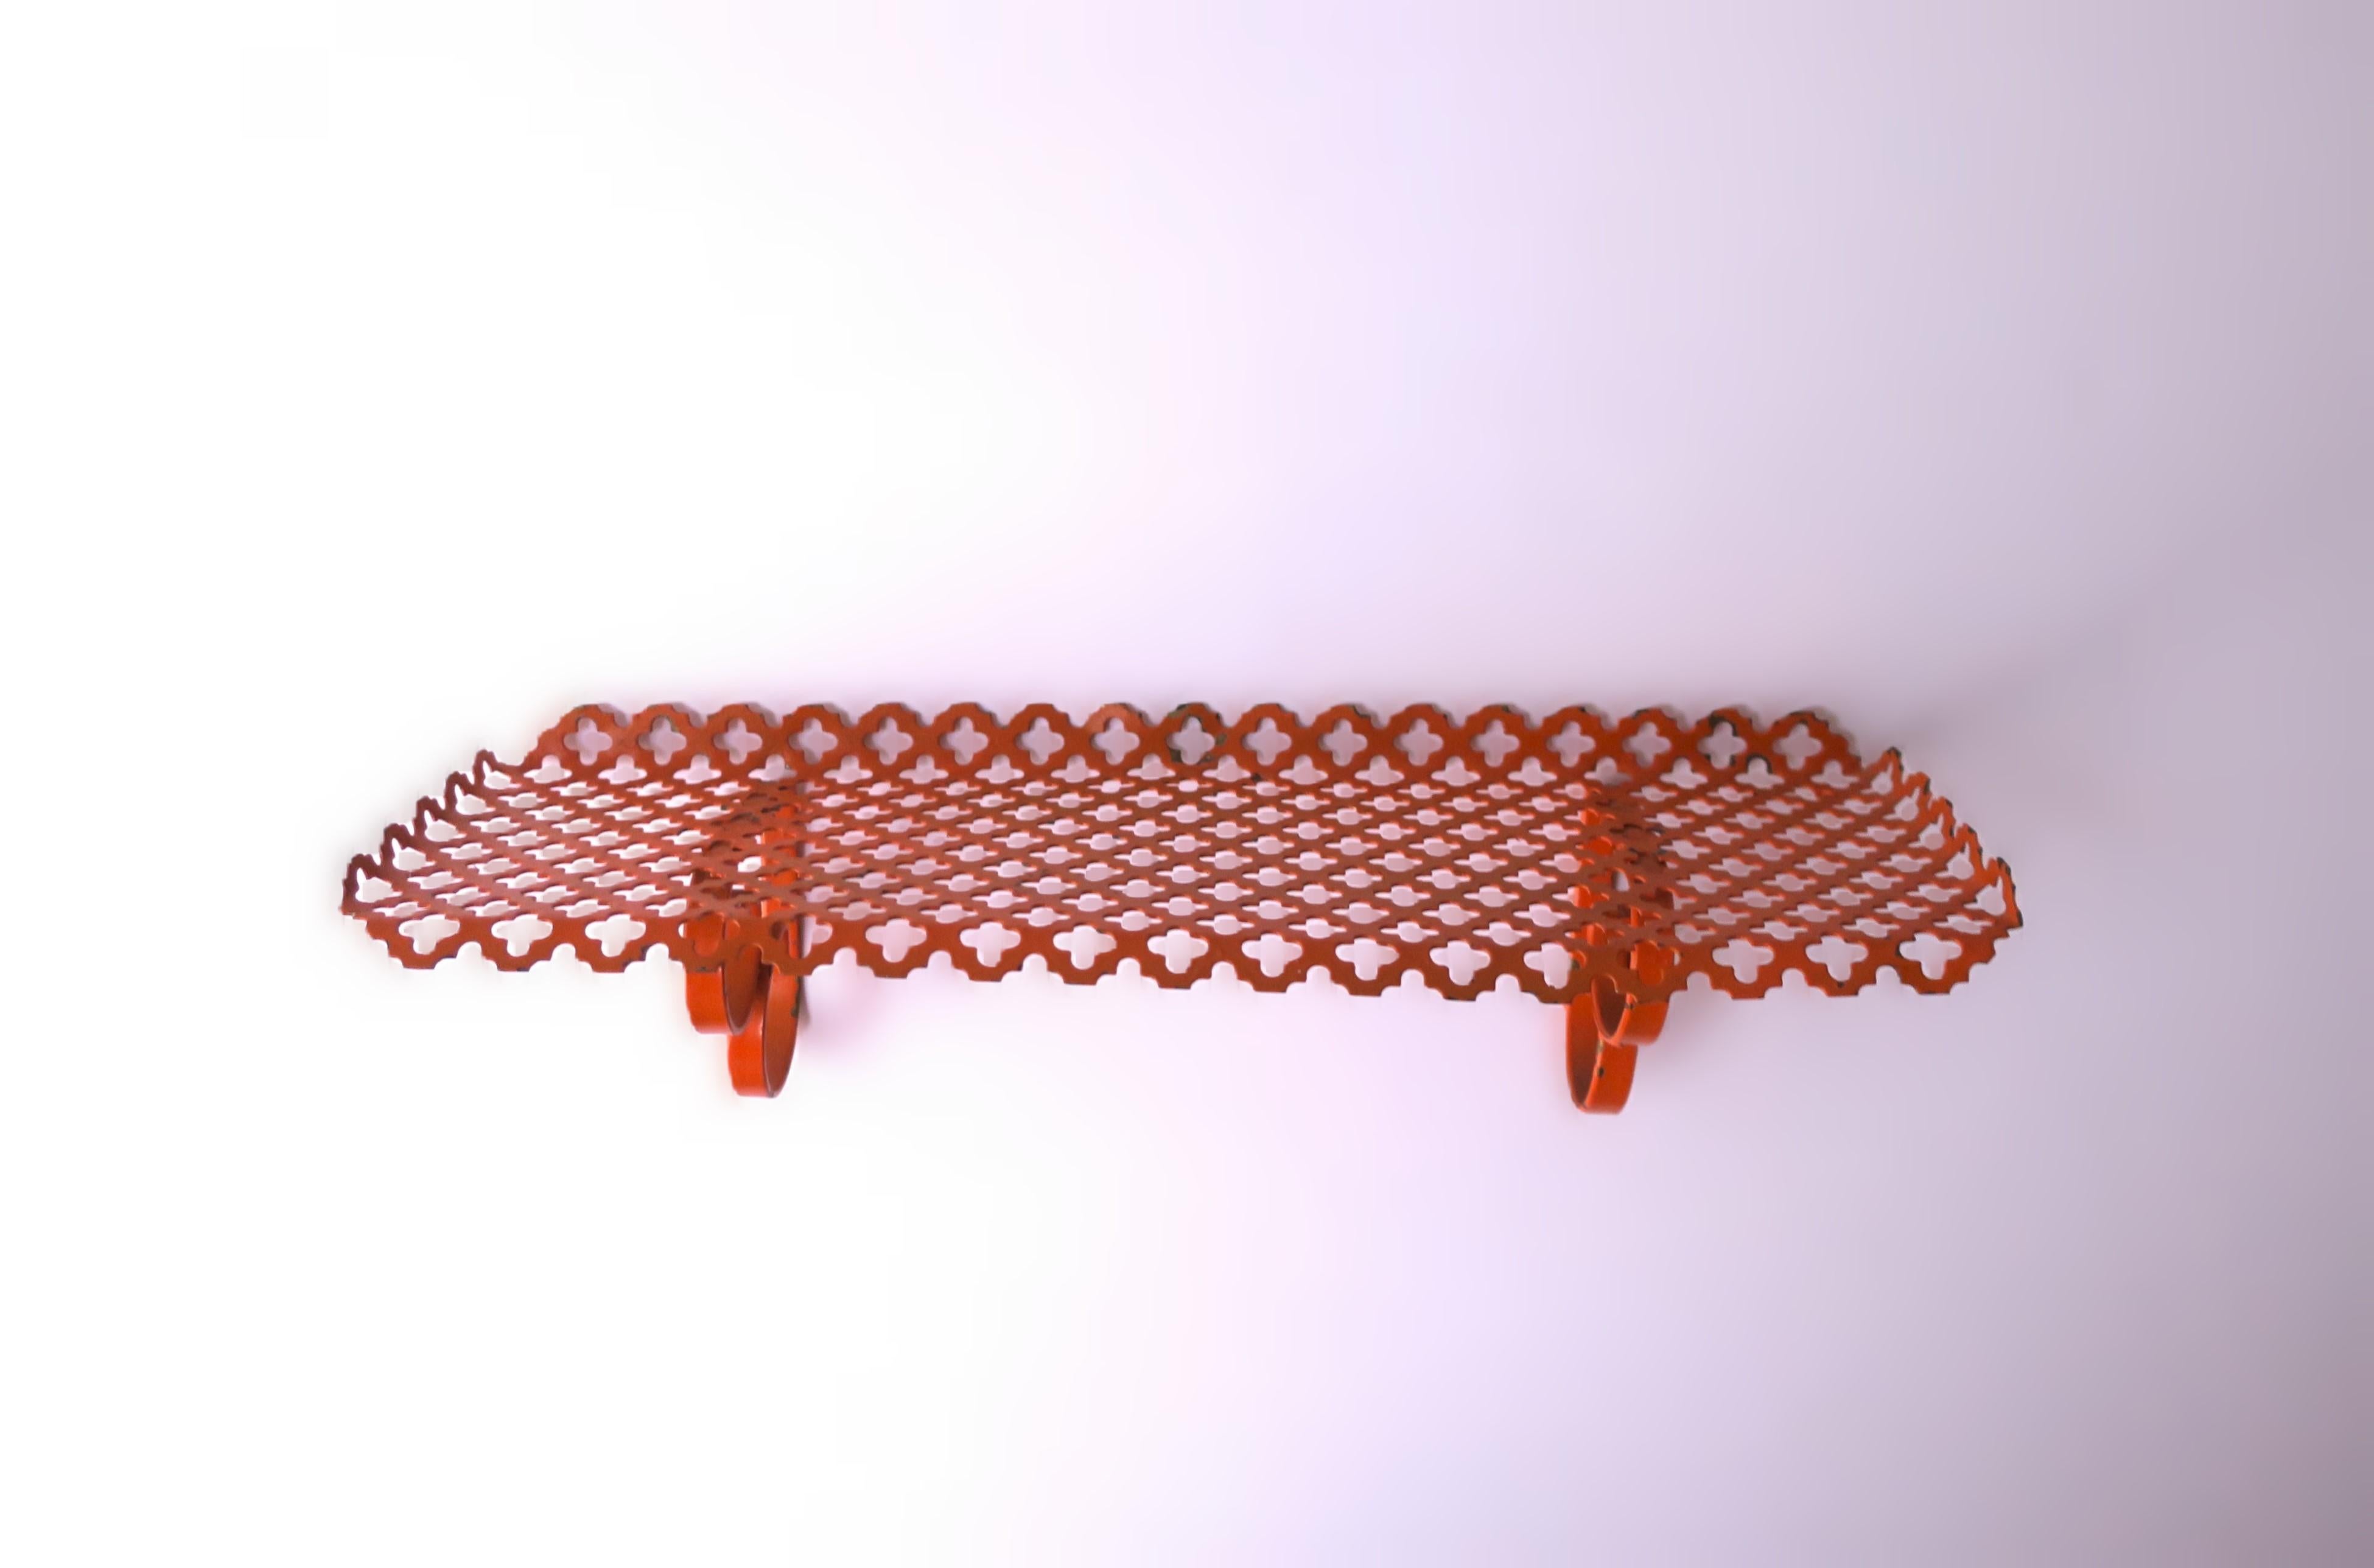 An orange metal wall shelf with perforated design, circa mid-20th century, 1960s. Piece may work well in a bedroom, bathroom, kitchen, etc., to hold various items (demonstrated holding perfume bottles.) Dimensions: 4.63